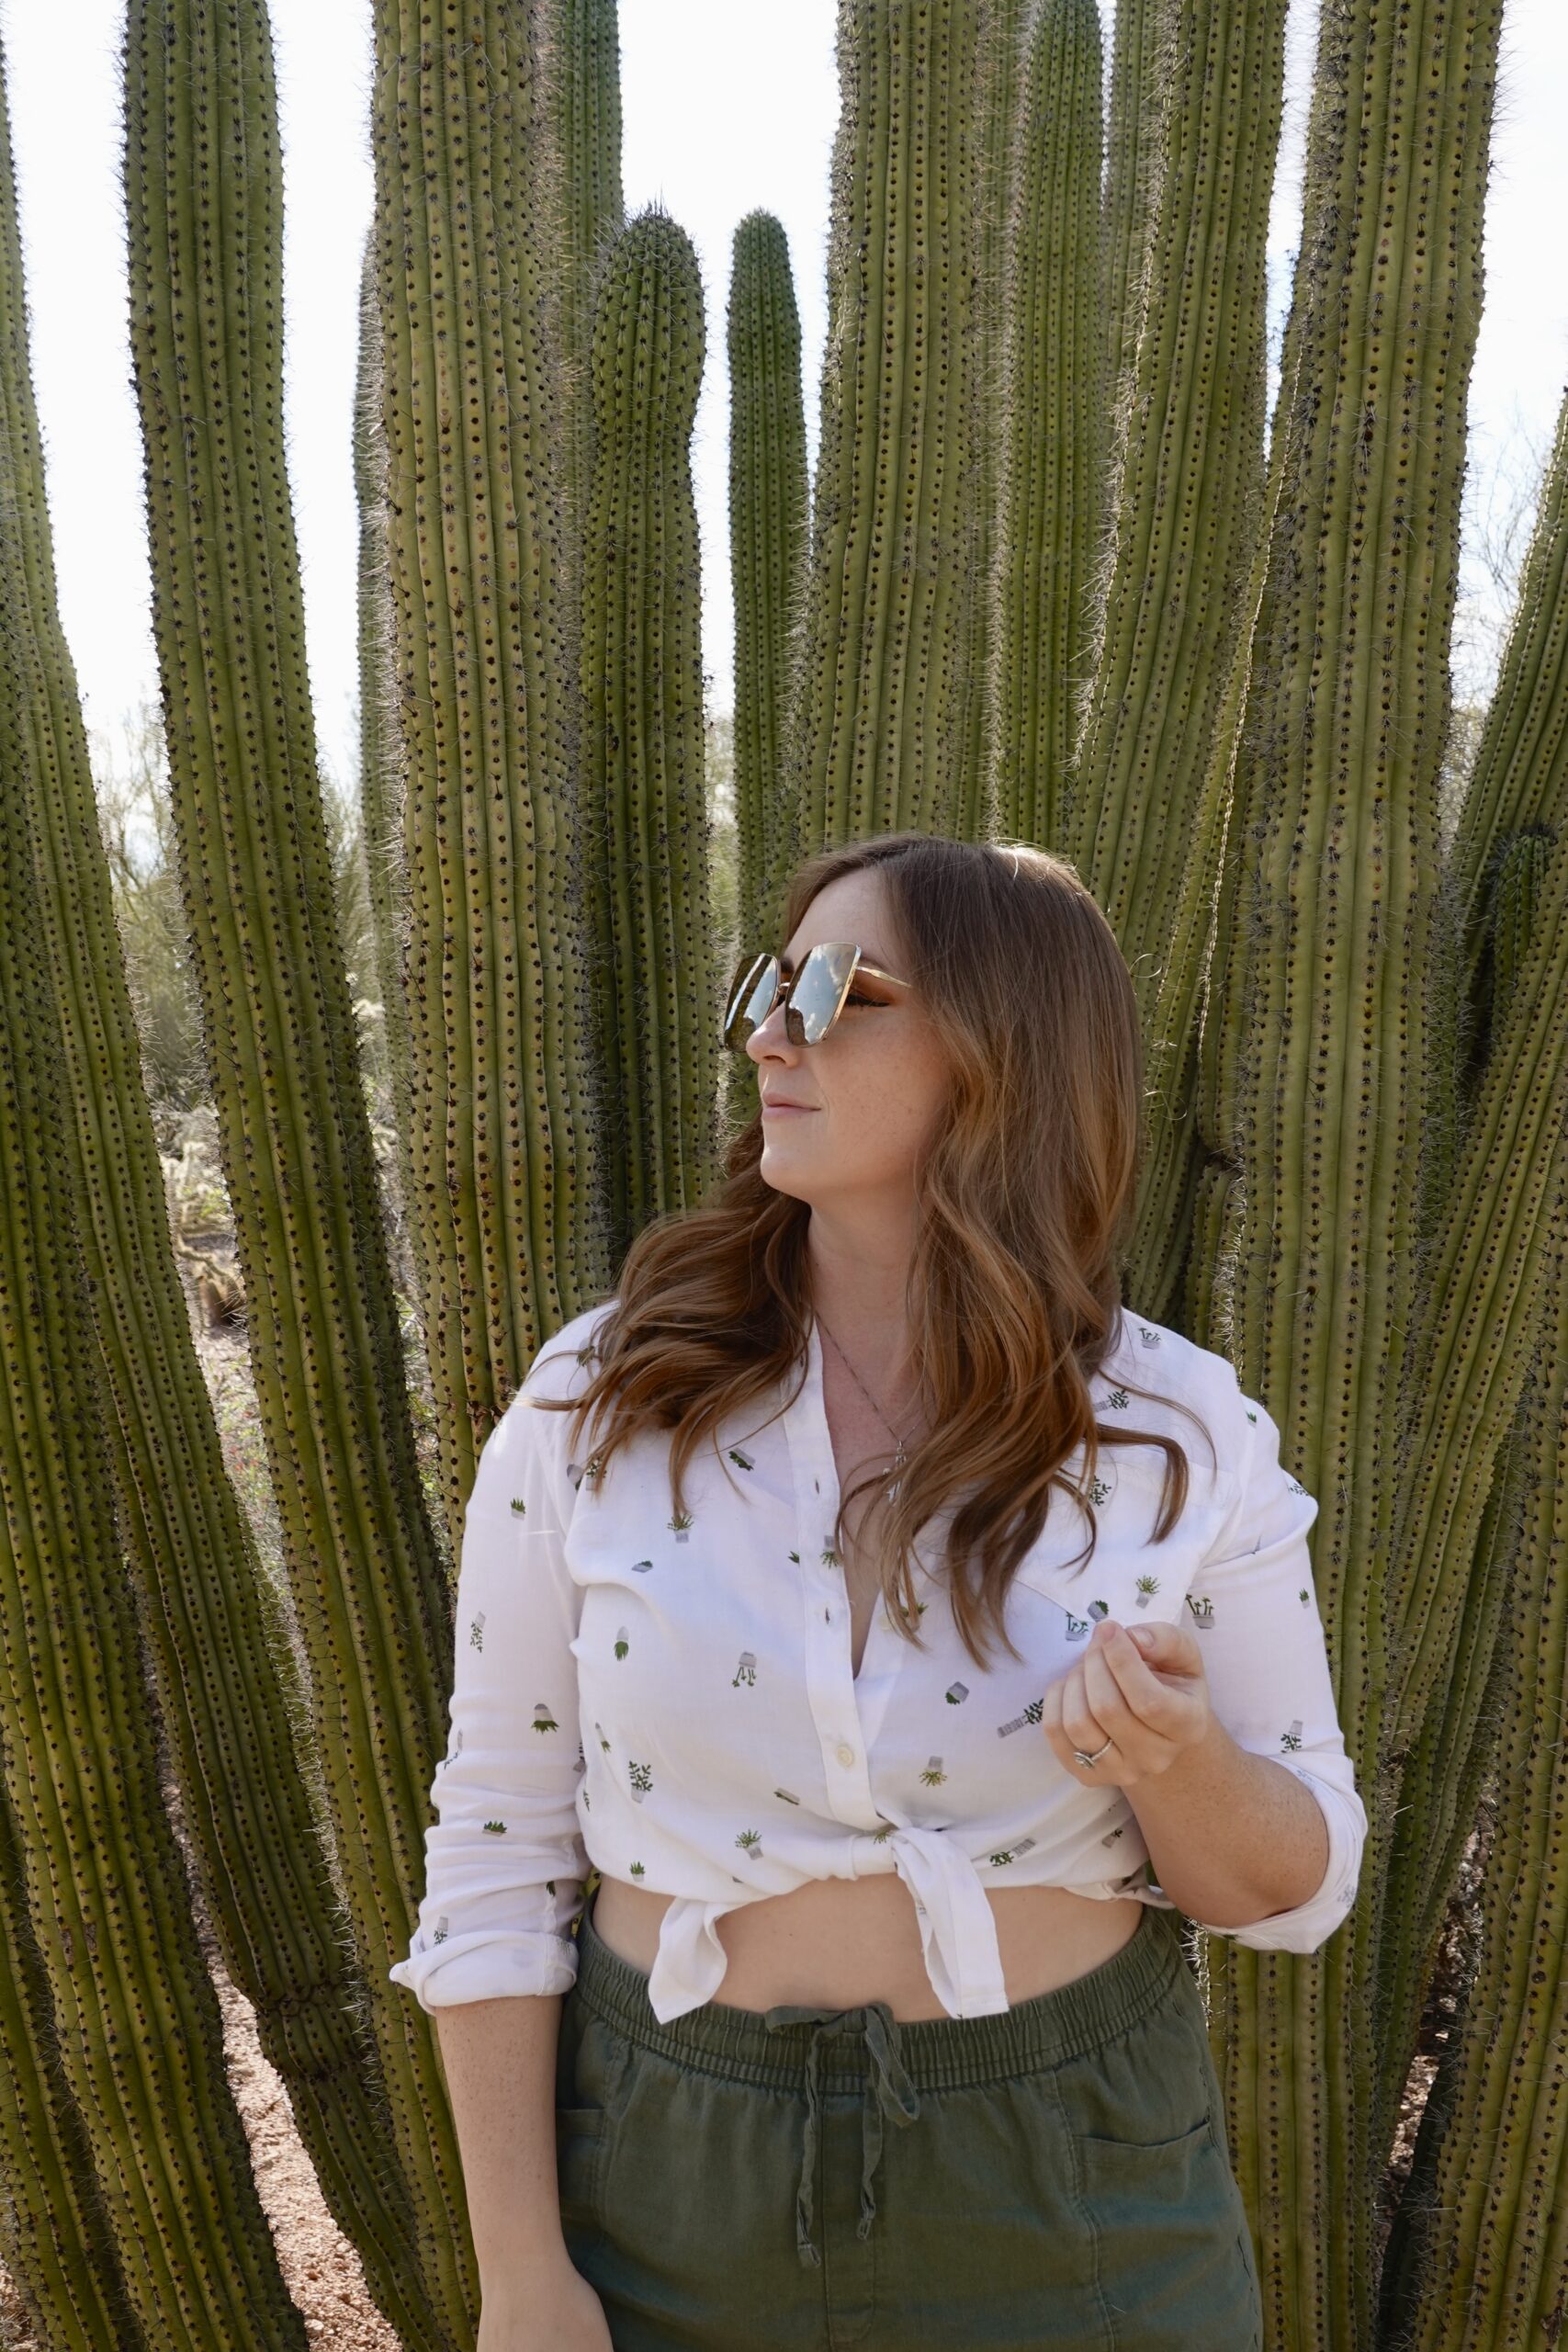 girl in a white shirt and sunglasses in front of cactus